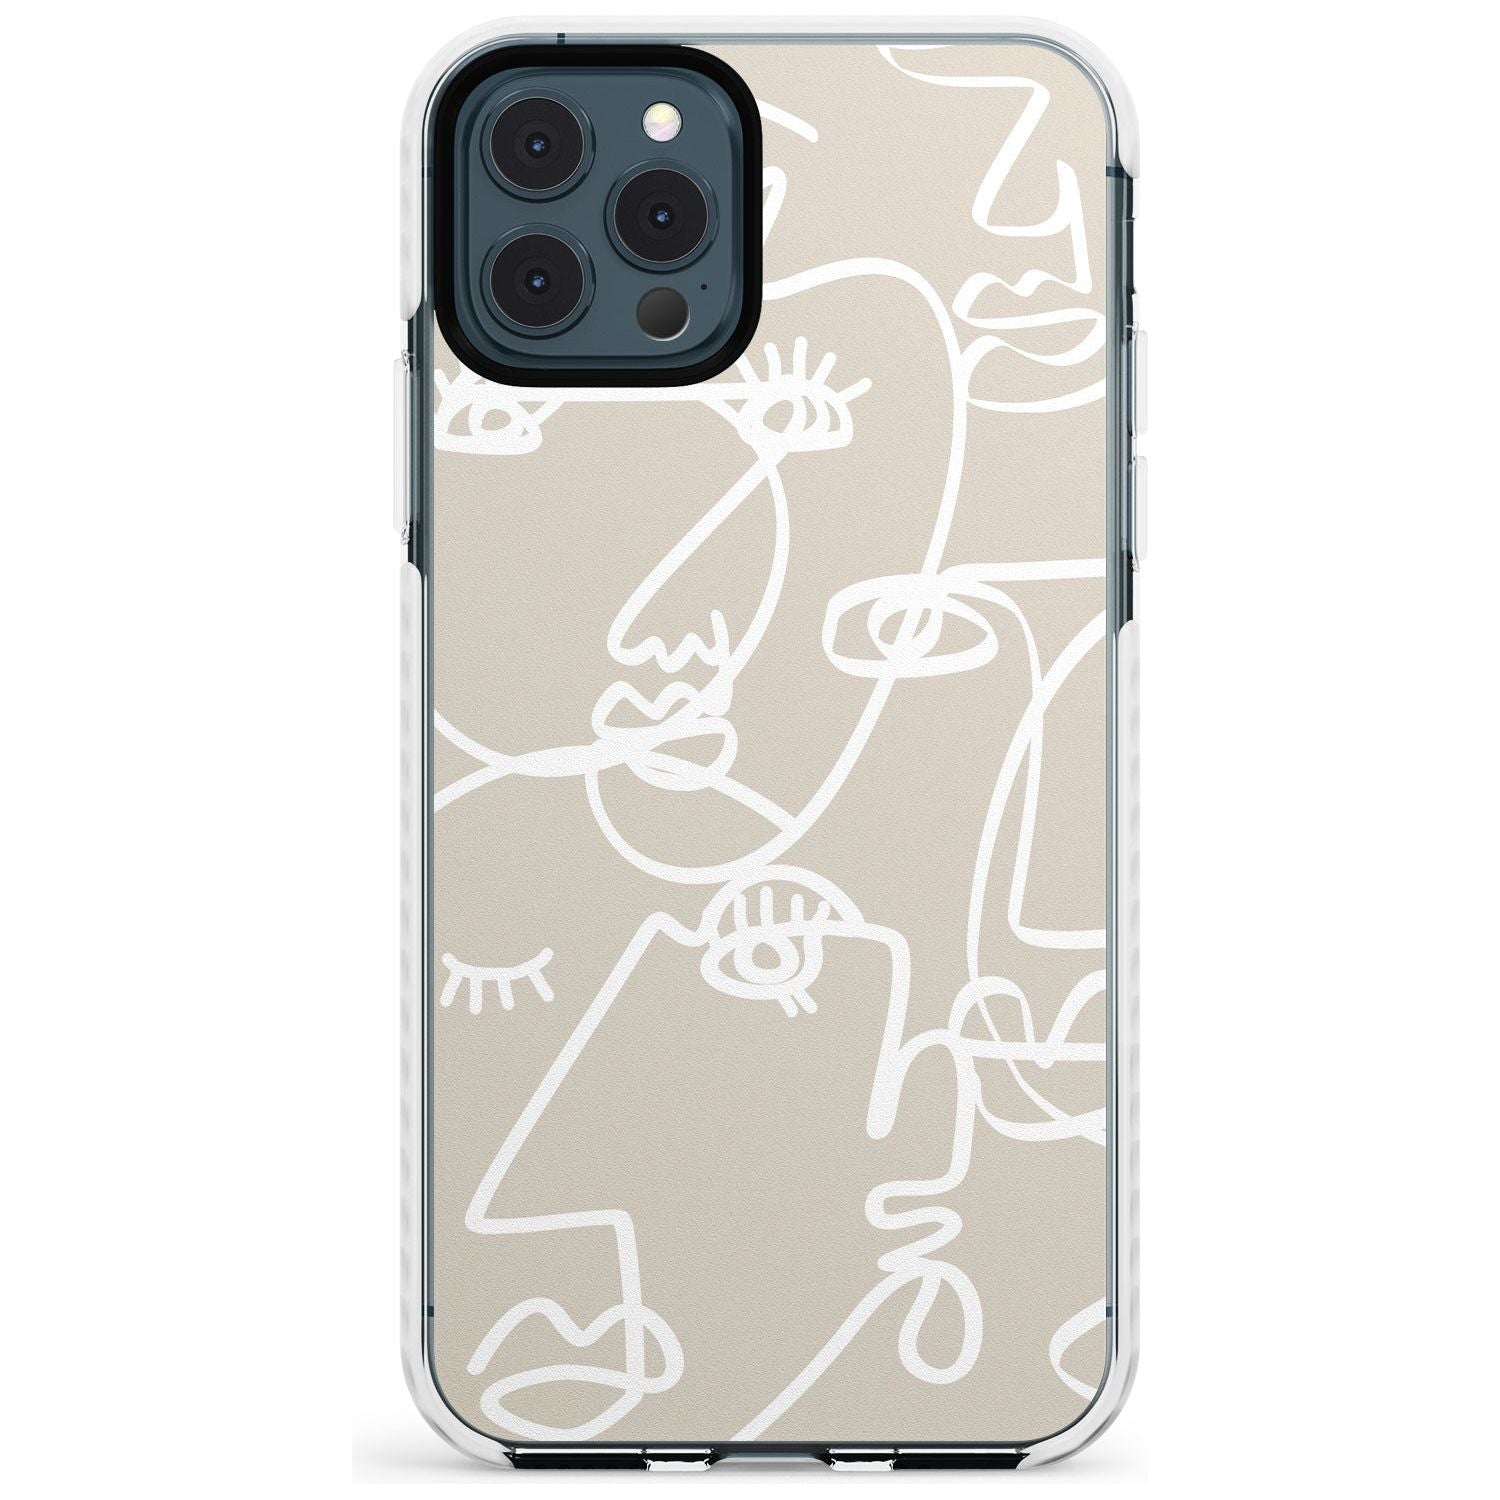 Continuous Line Faces: White on Beige Slim TPU Phone Case for iPhone 11 Pro Max